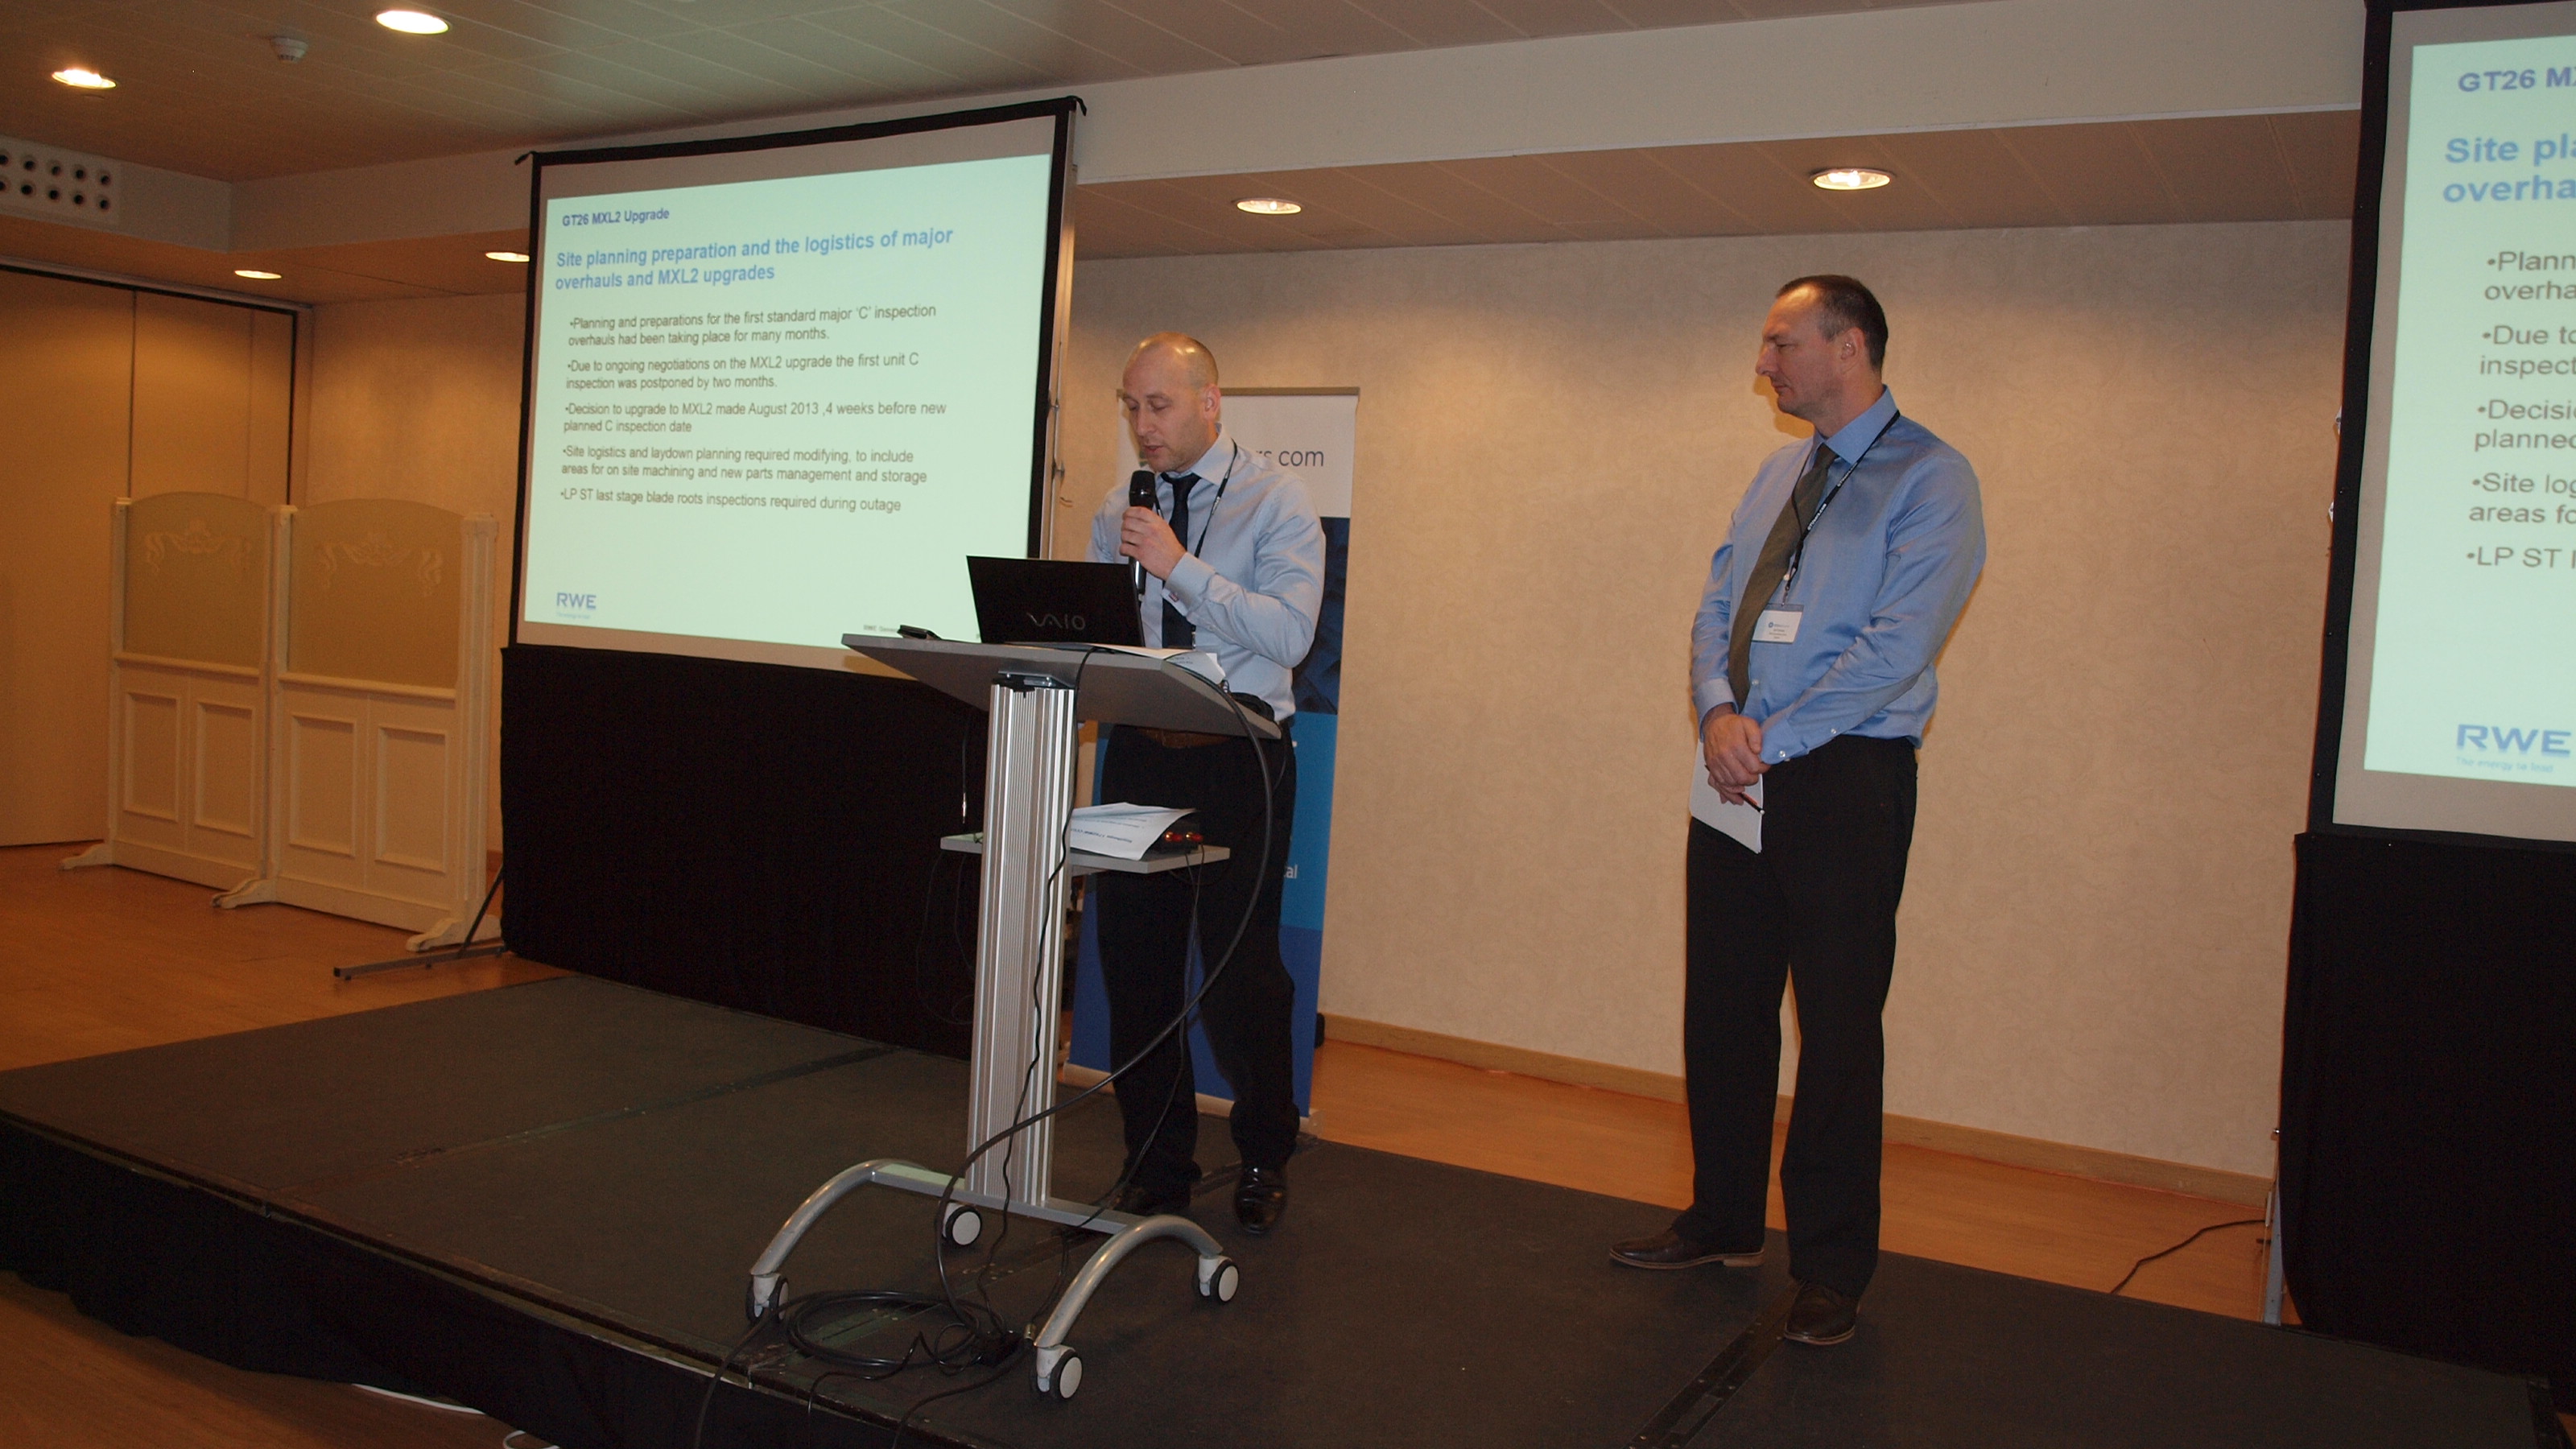 Gareth Maslin and Ian Farrow from RWE gave a presentation at GT26 end user conference